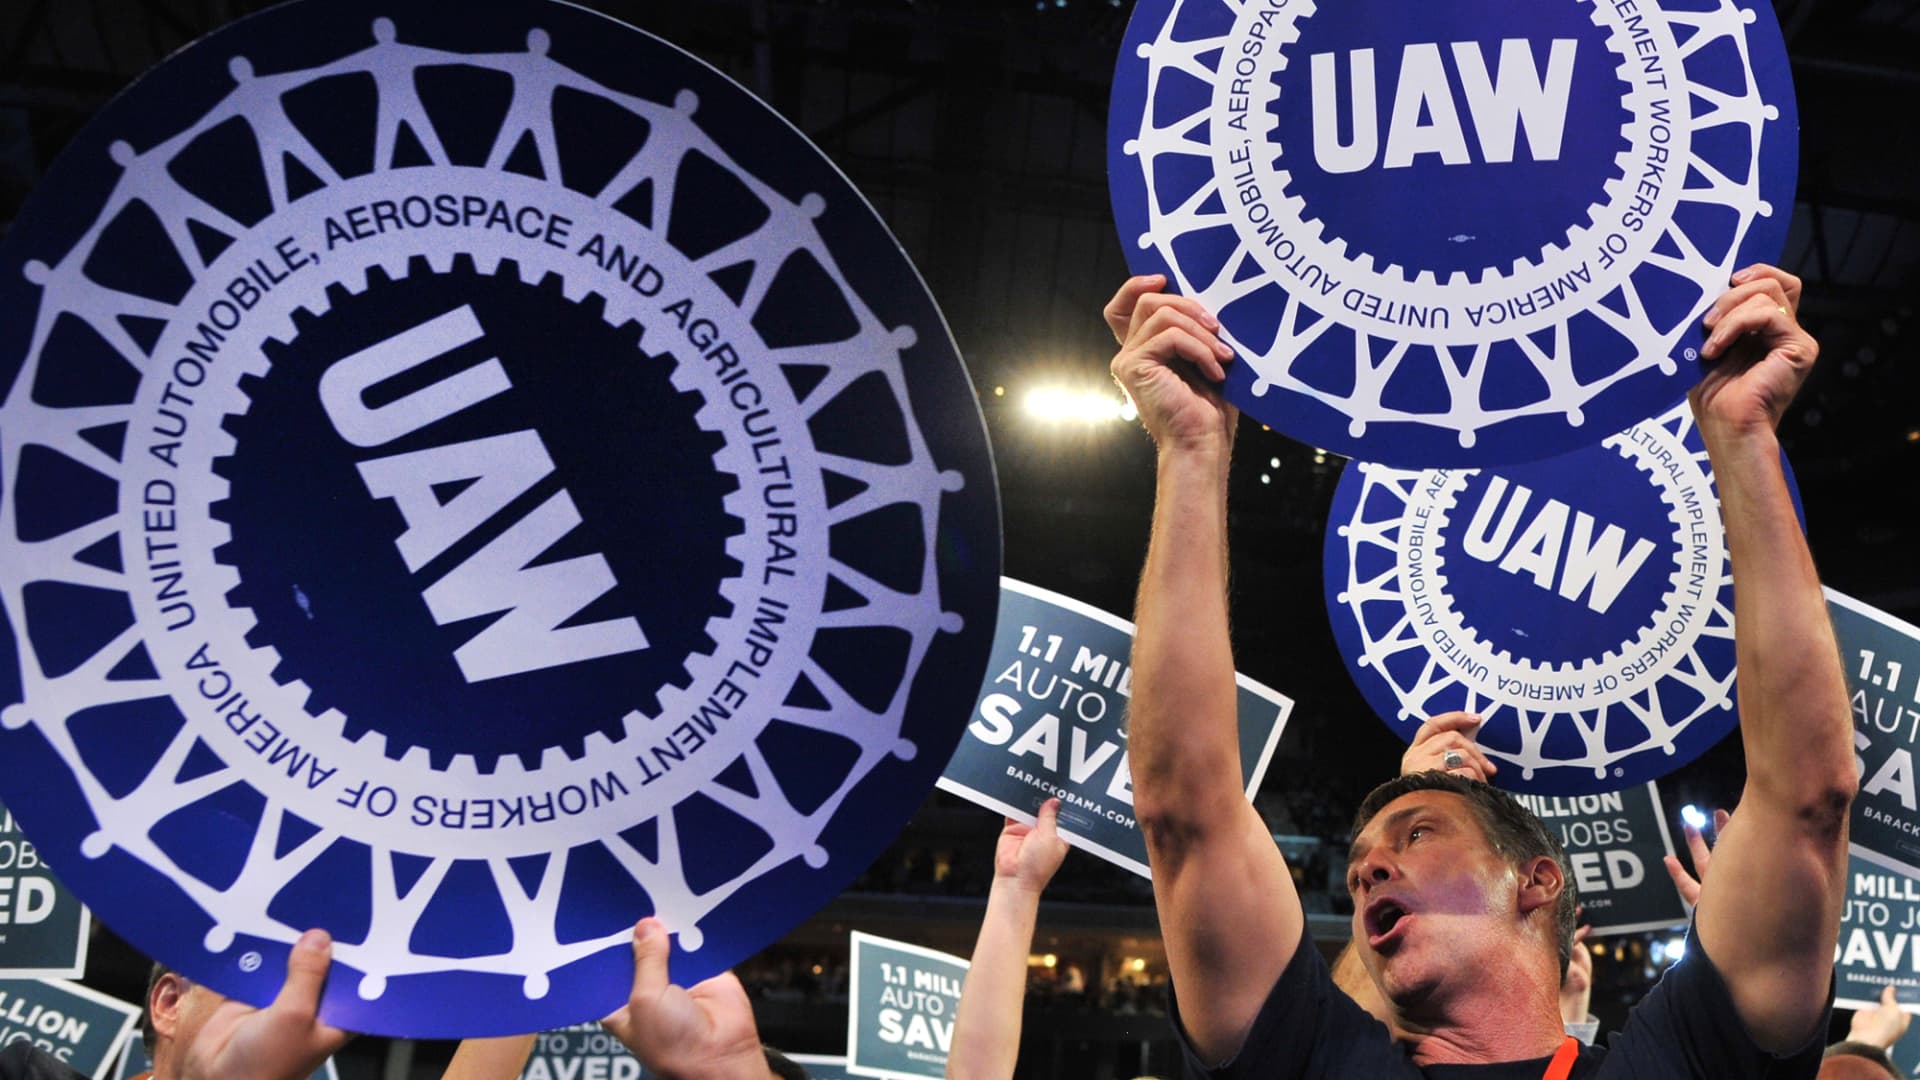 Historic UAW election picks reform leader who vows more aggressive approach to auto negotiations